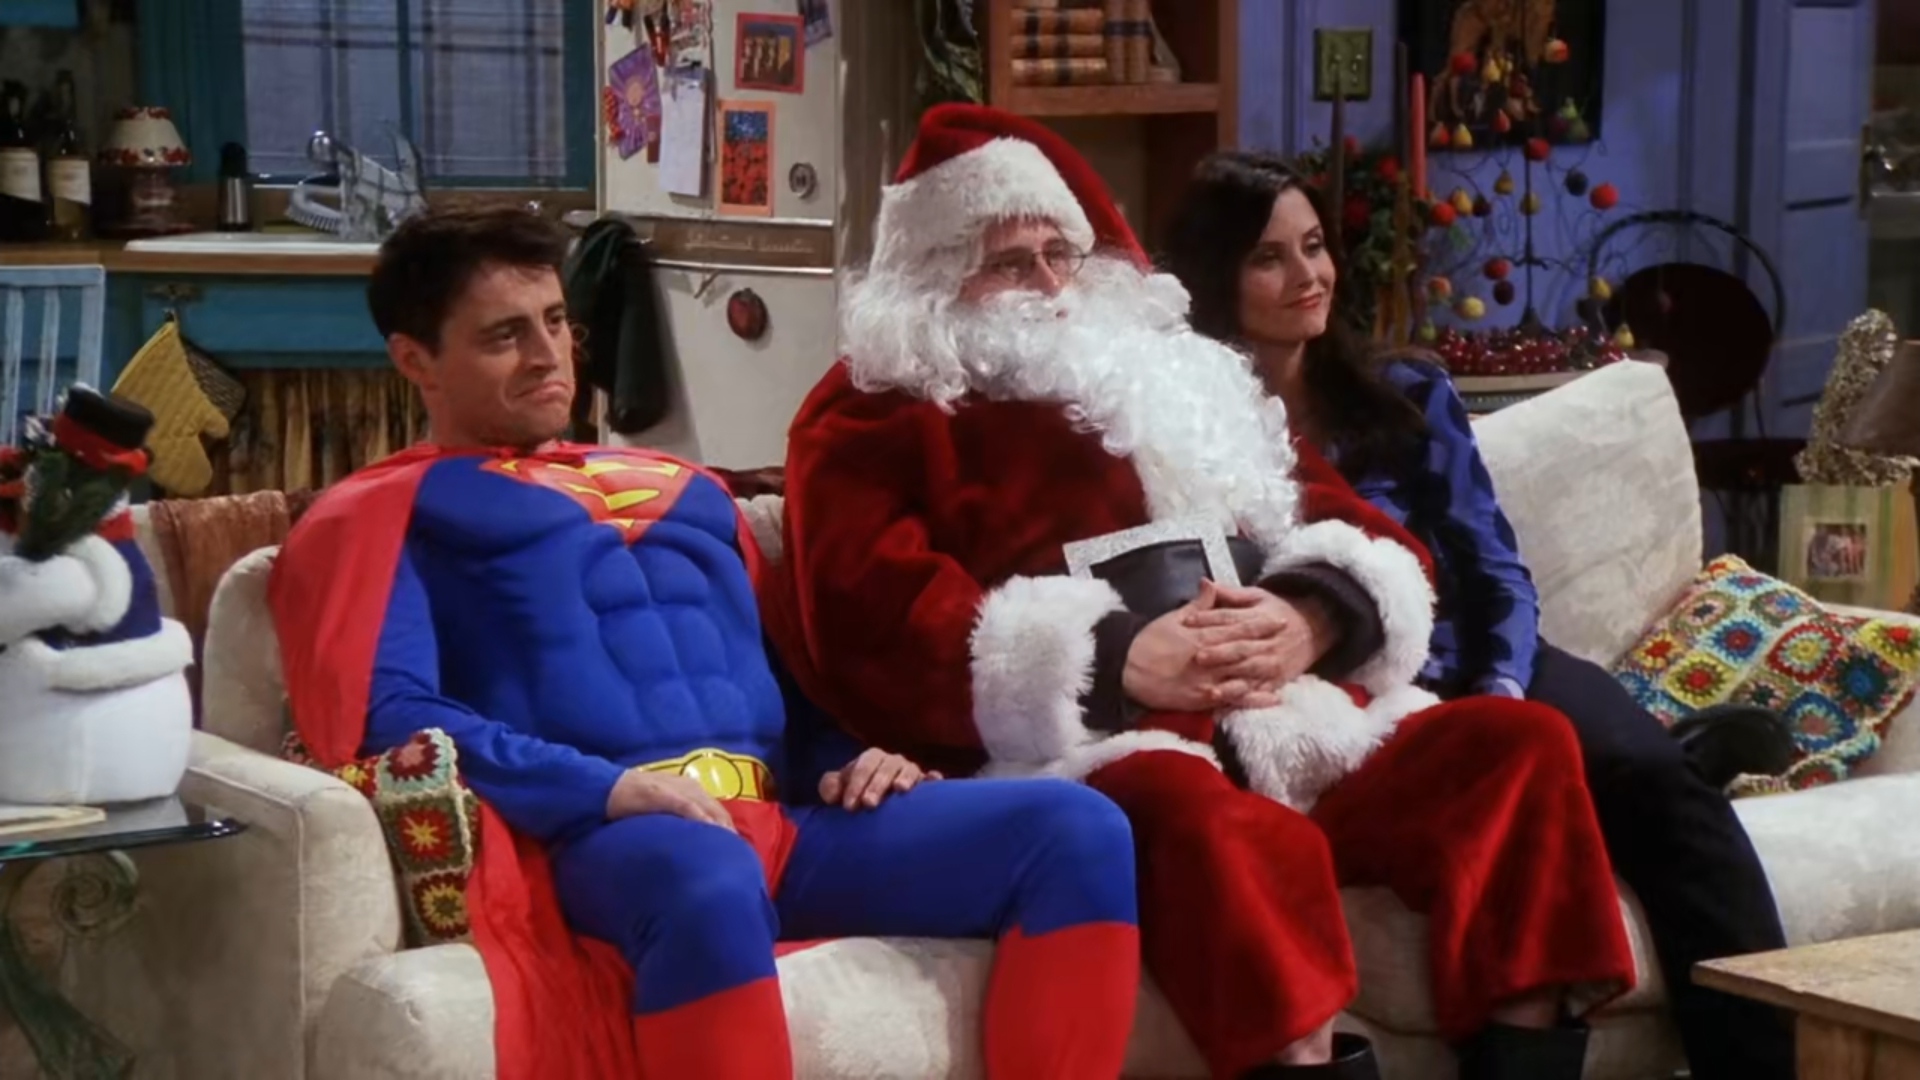 Friends Tv Show Christmas Wallpapers